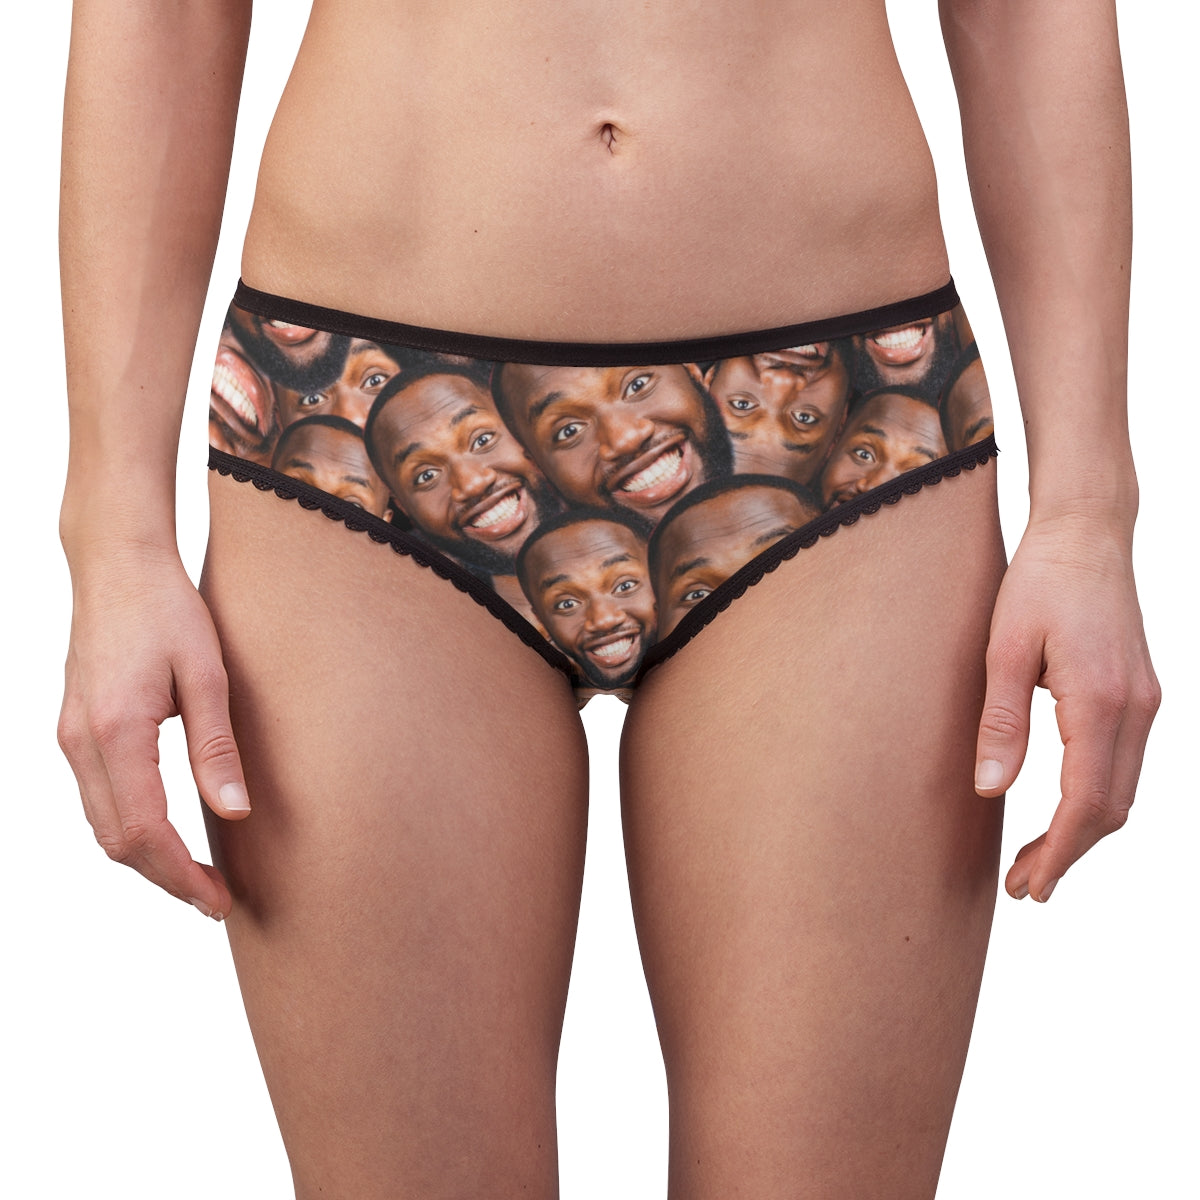 Personalised Knickers With Faces Printed On - Clever Creations